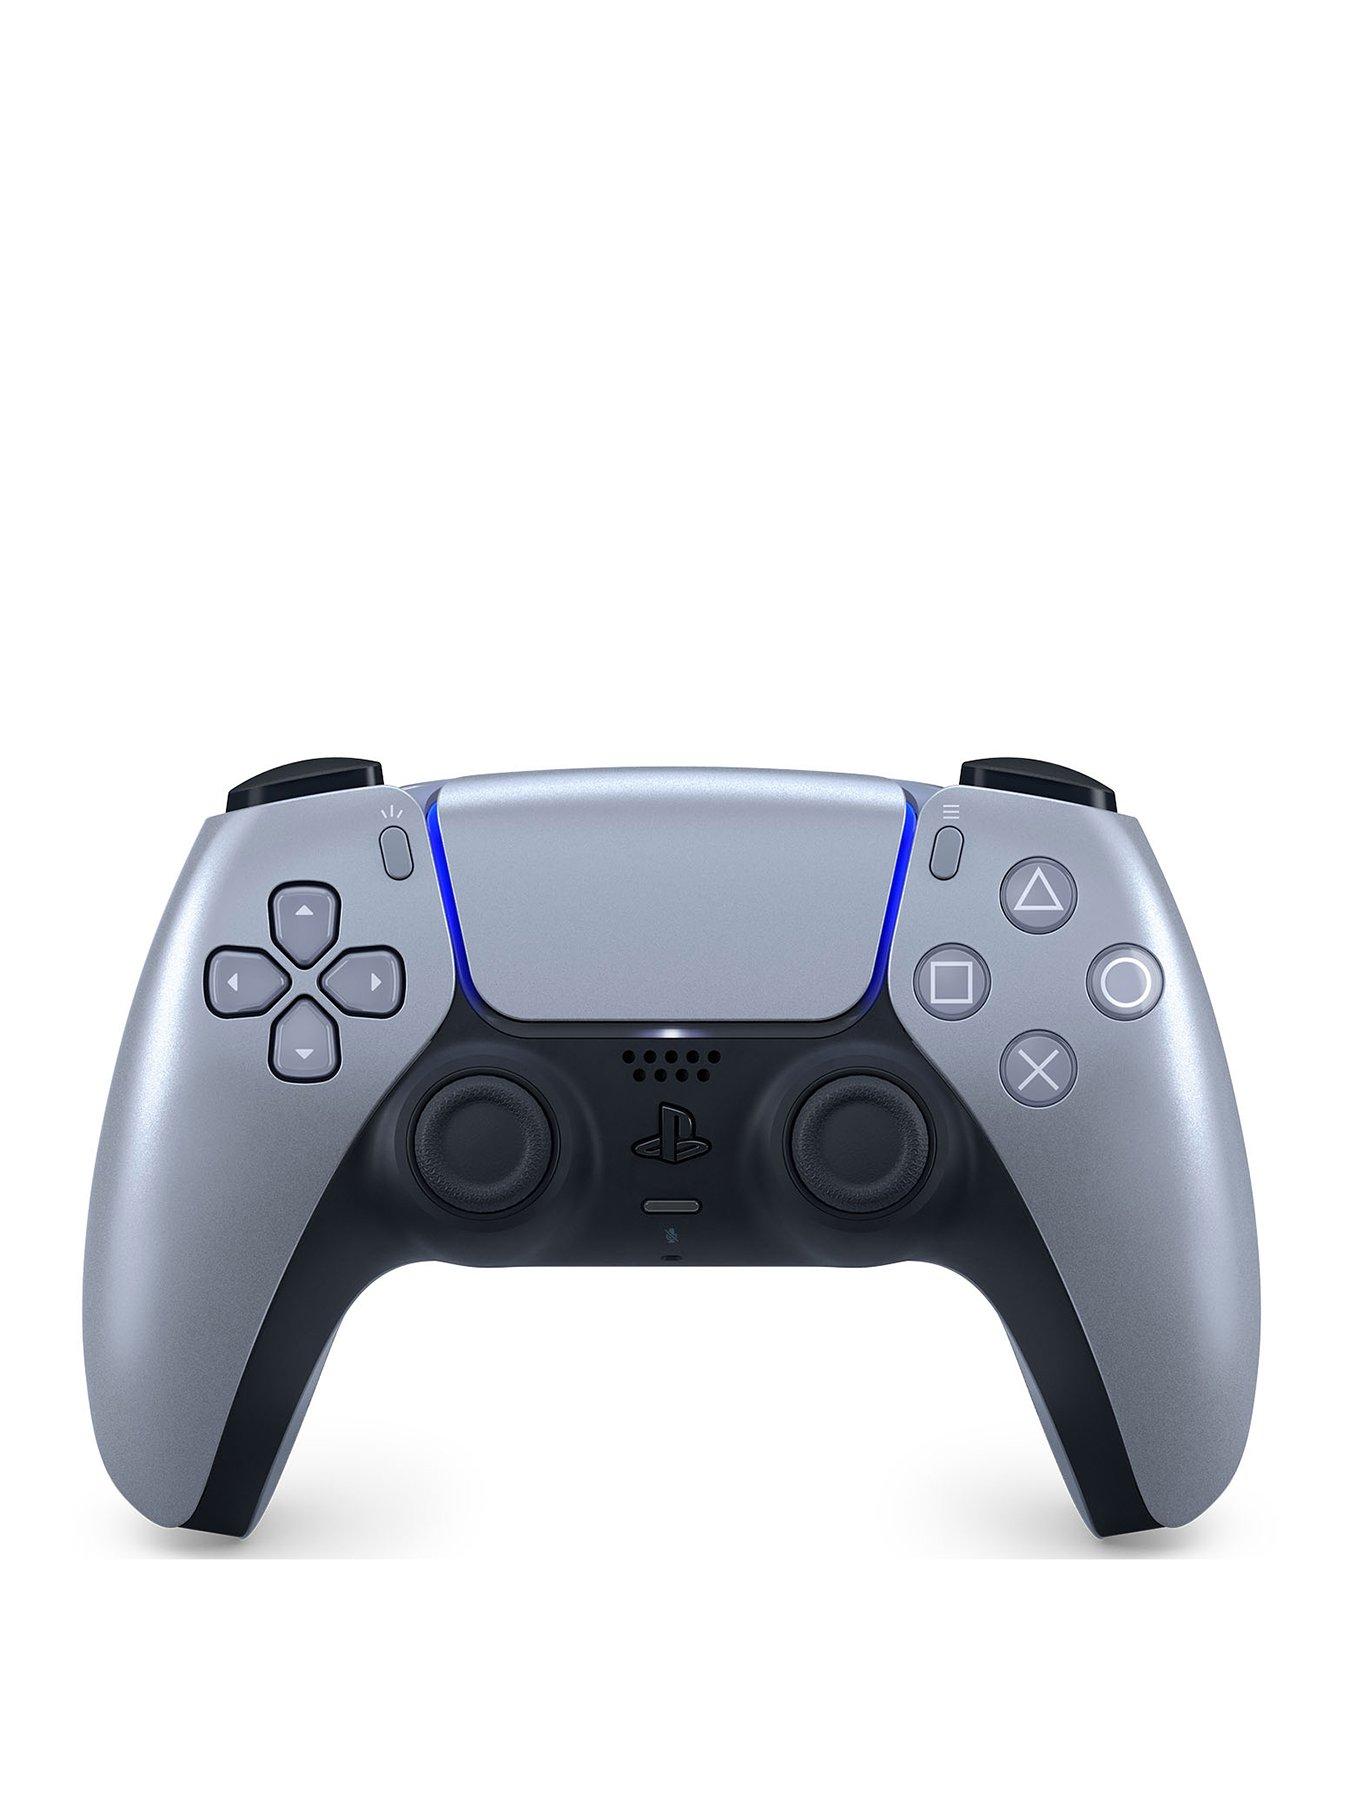 PlayStation 5 DualSense Wireless Controller - Sterling Silver